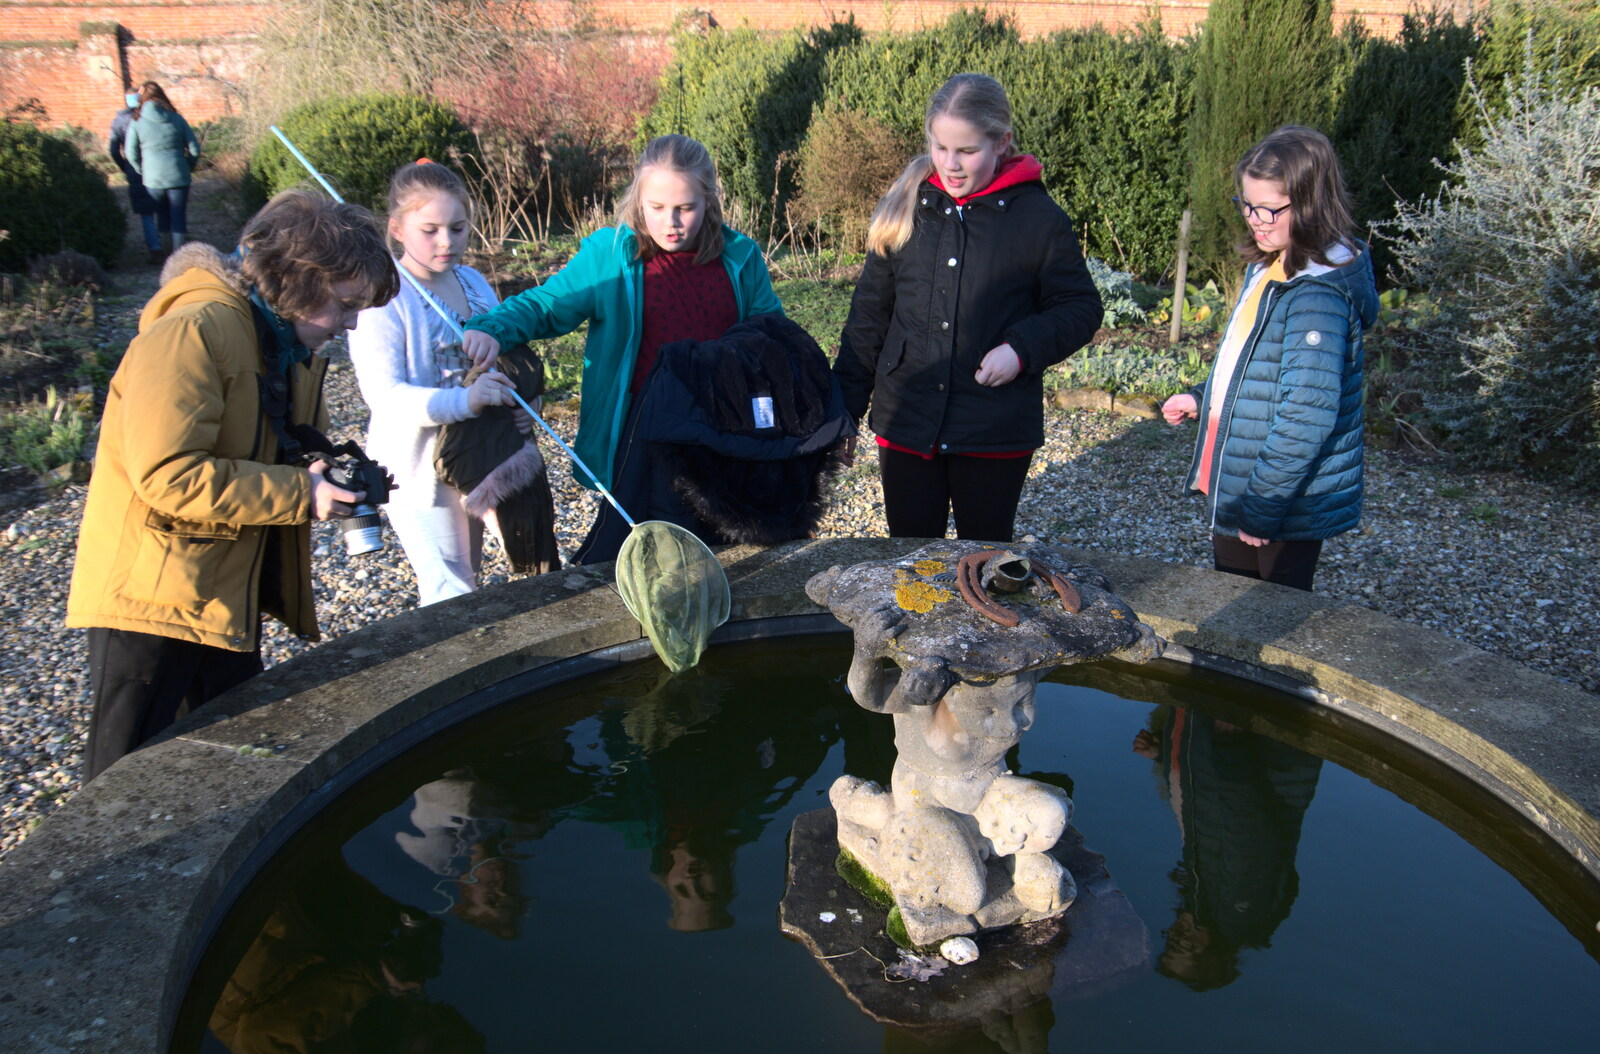 There's some messing around in an ornamental pond from Snowdrops at Talconeston Hall, Tacolneston, Norfolk - 7th February 2020